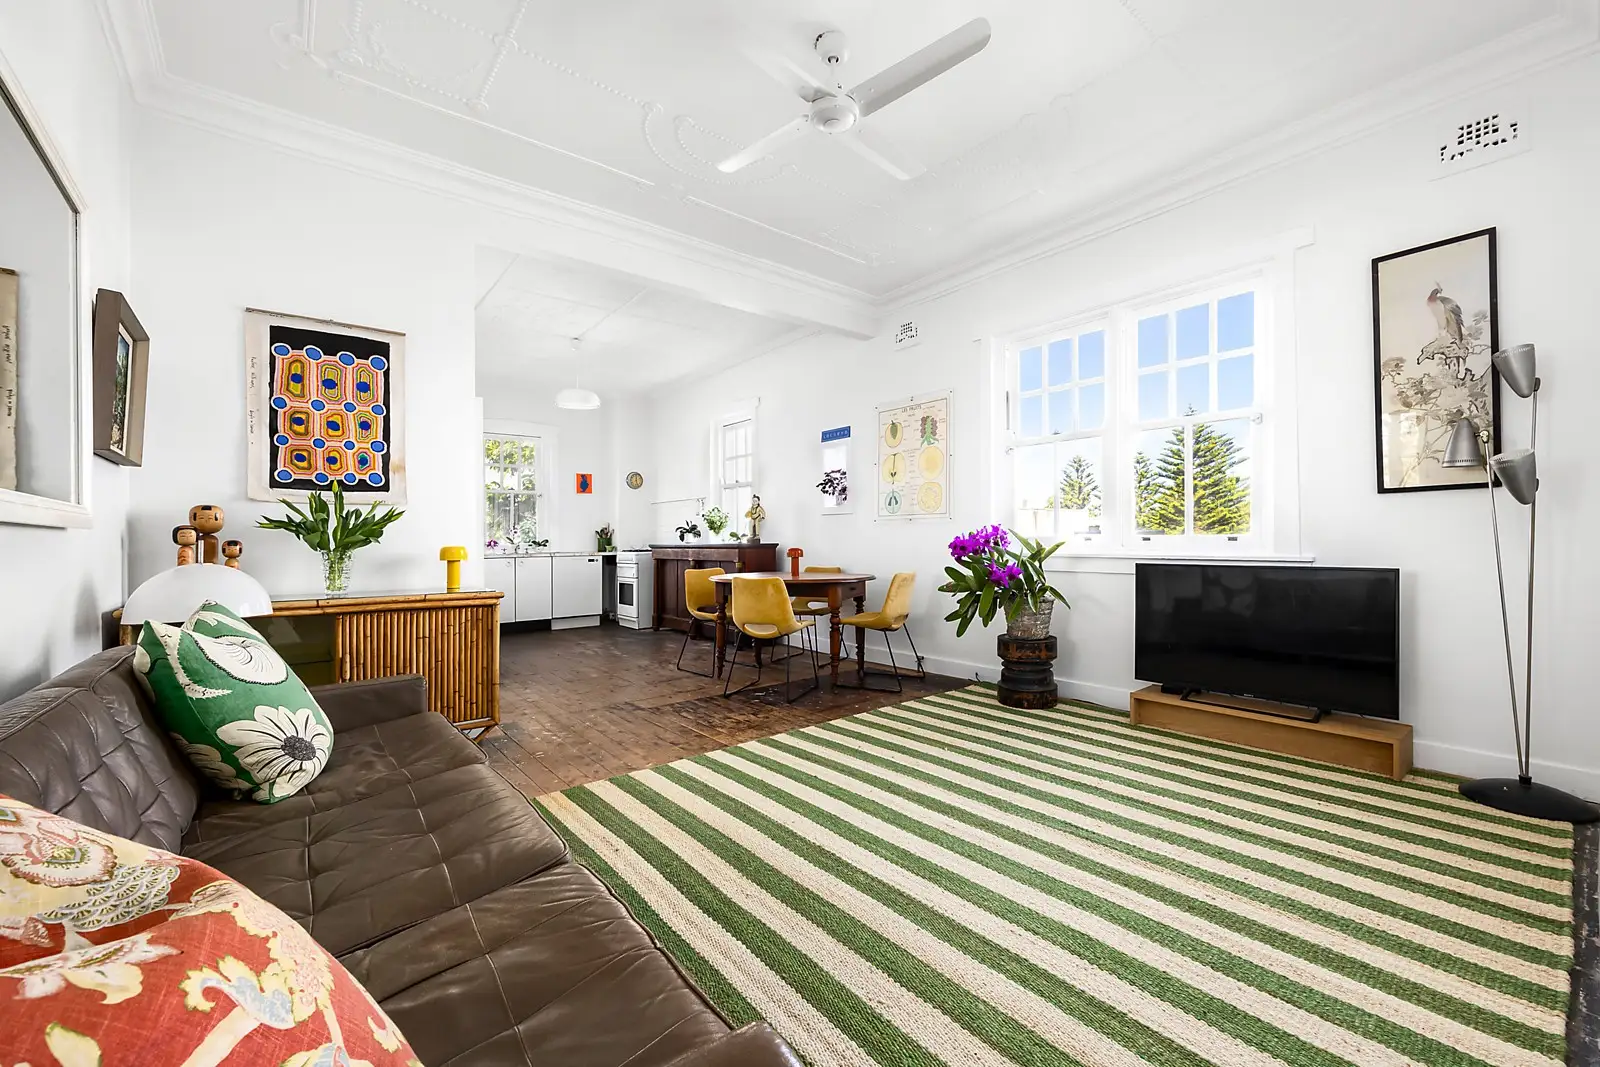 Photo #1: 6/169 Arden Street, Coogee - Sold by Sydney Sotheby's International Realty